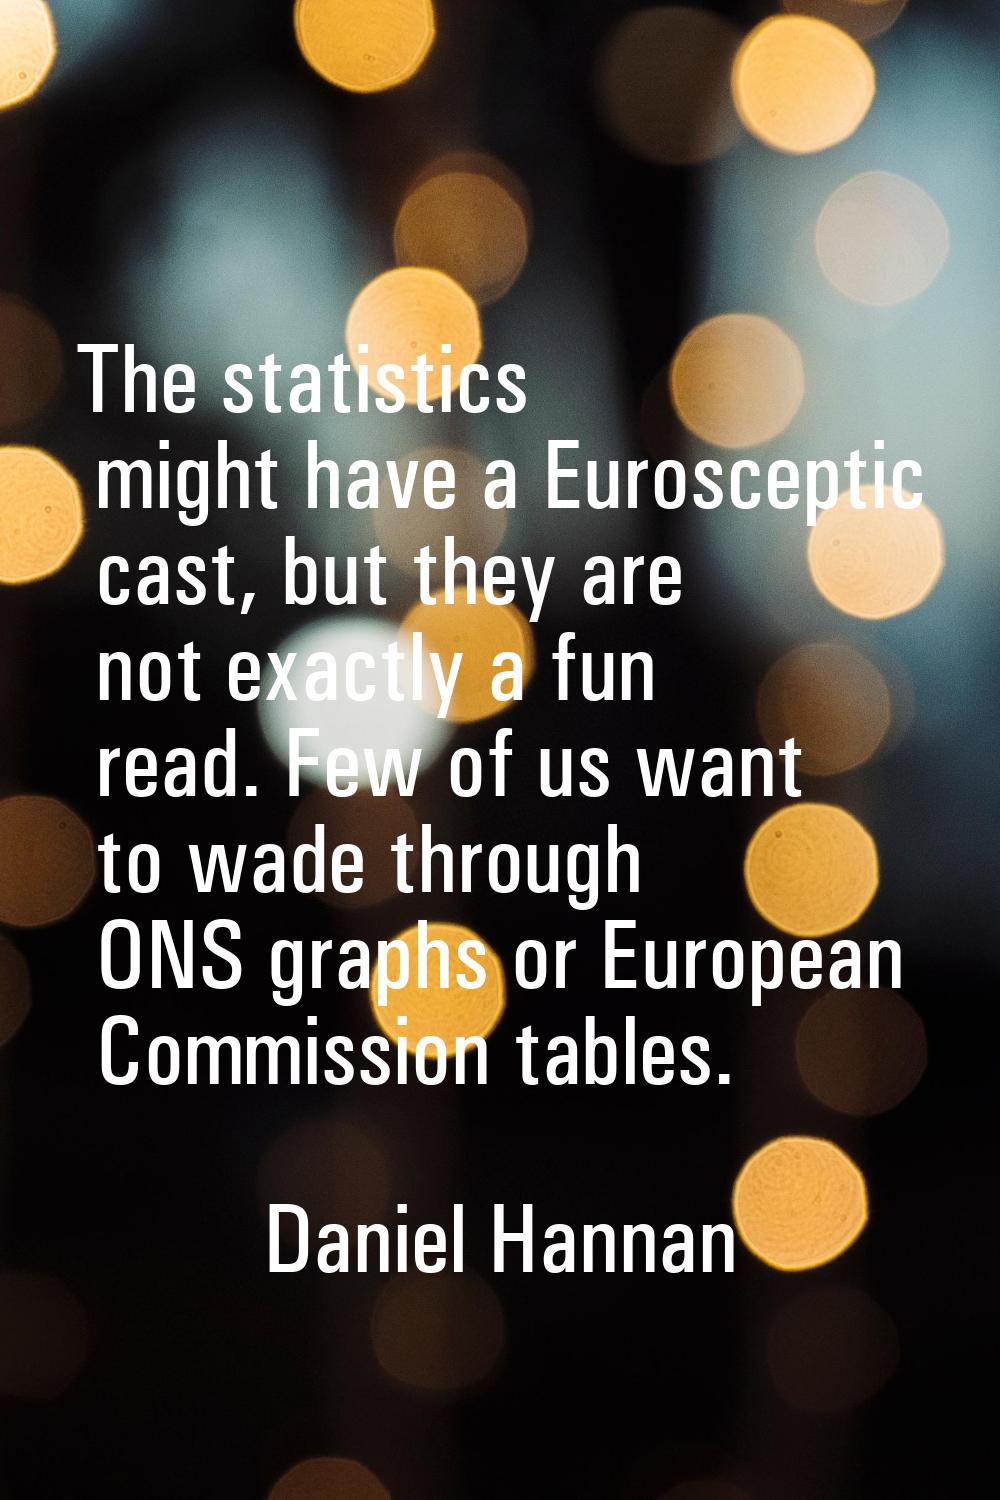 The statistics might have a Eurosceptic cast, but they are not exactly a fun read. Few of us want t